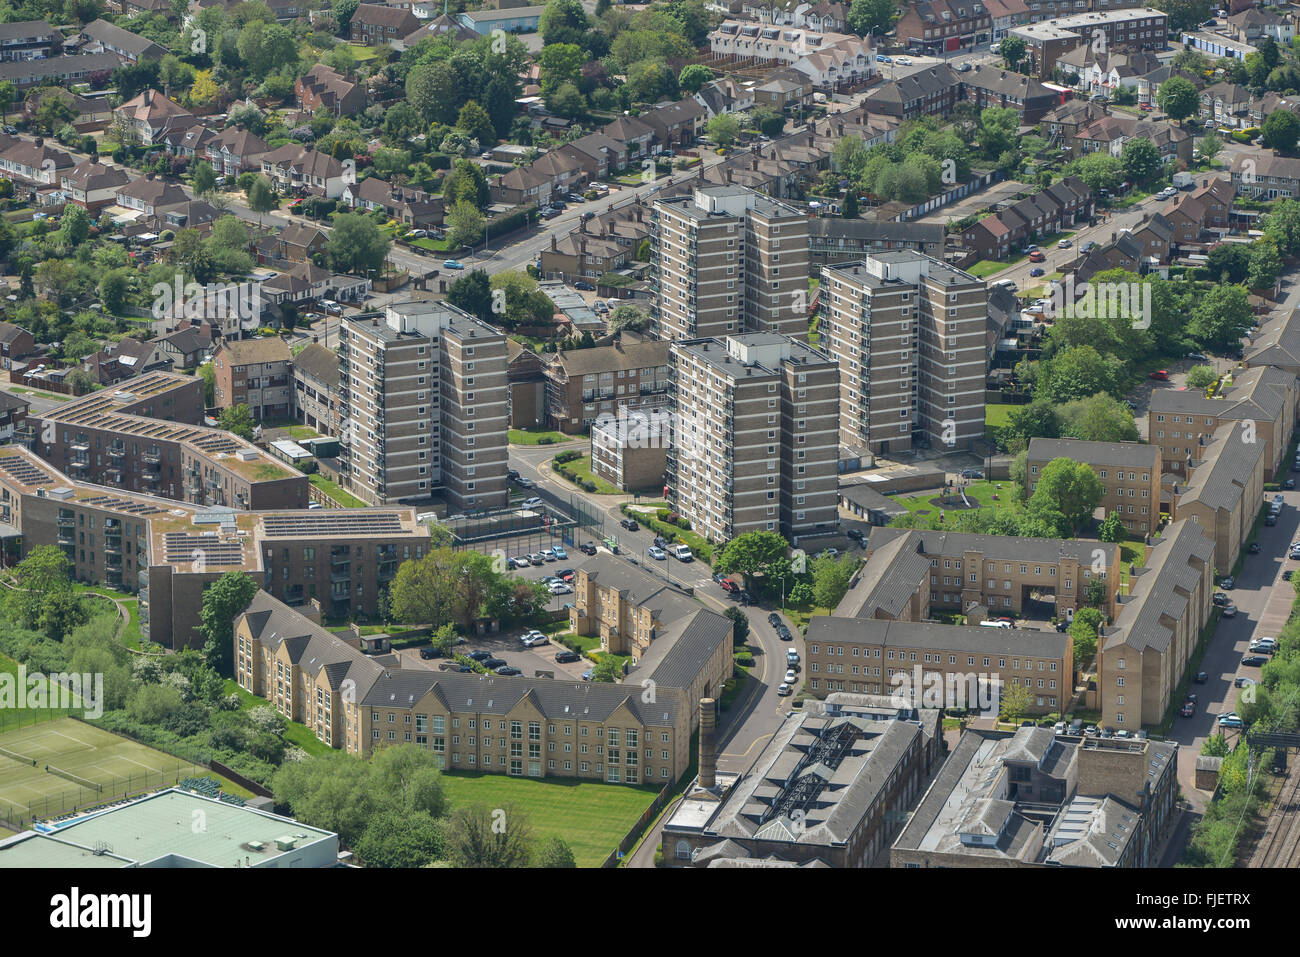 An aerial view of the Gidea Park area of Romford, Havering, Greater London Stock Photo